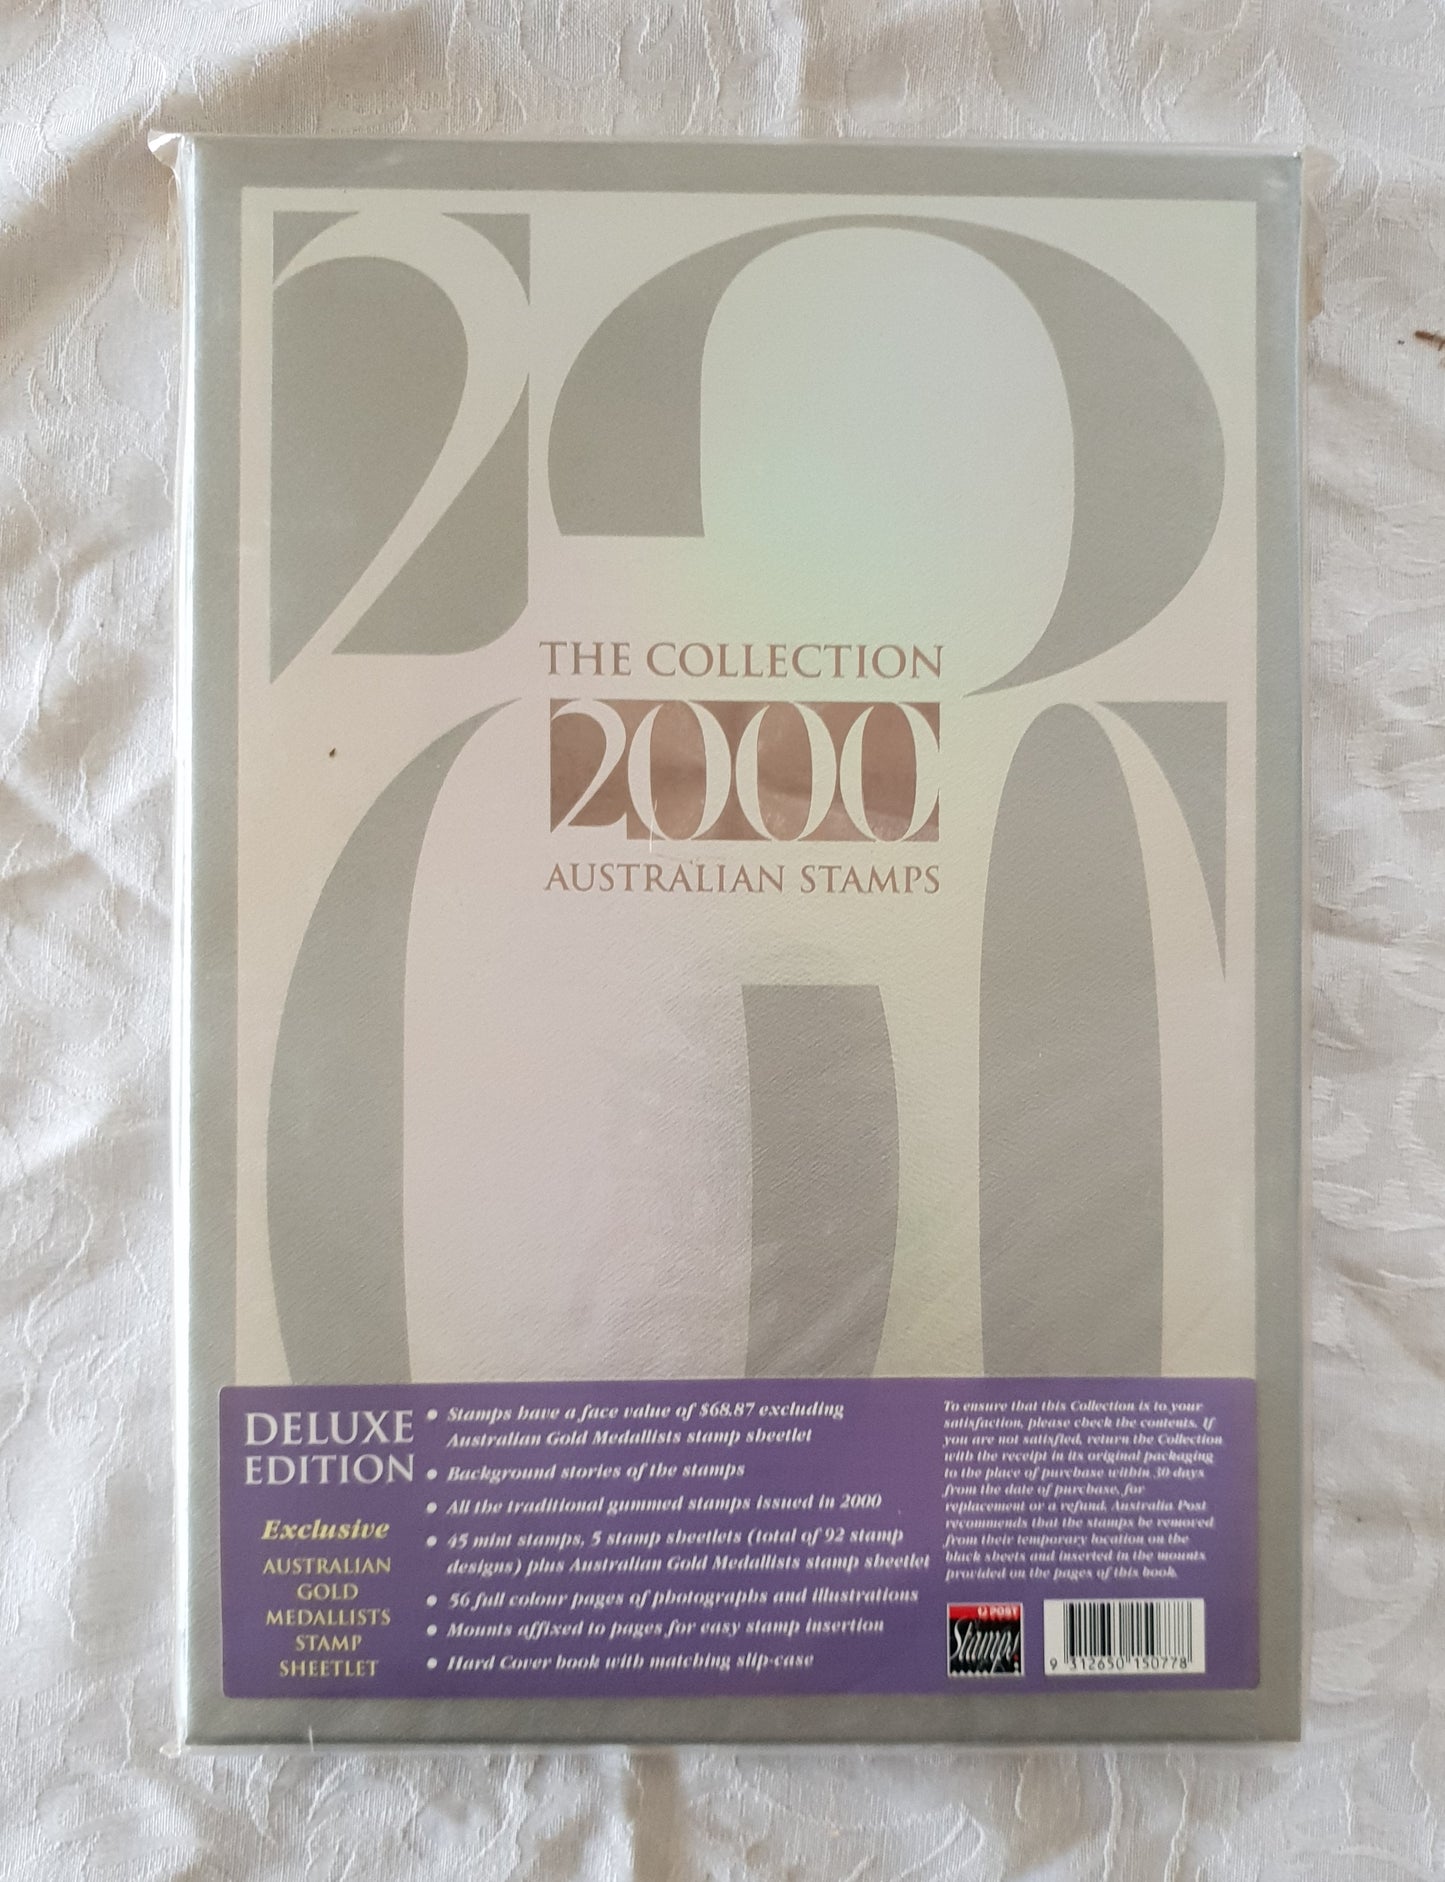 The Collection 2000 Australian Stamps